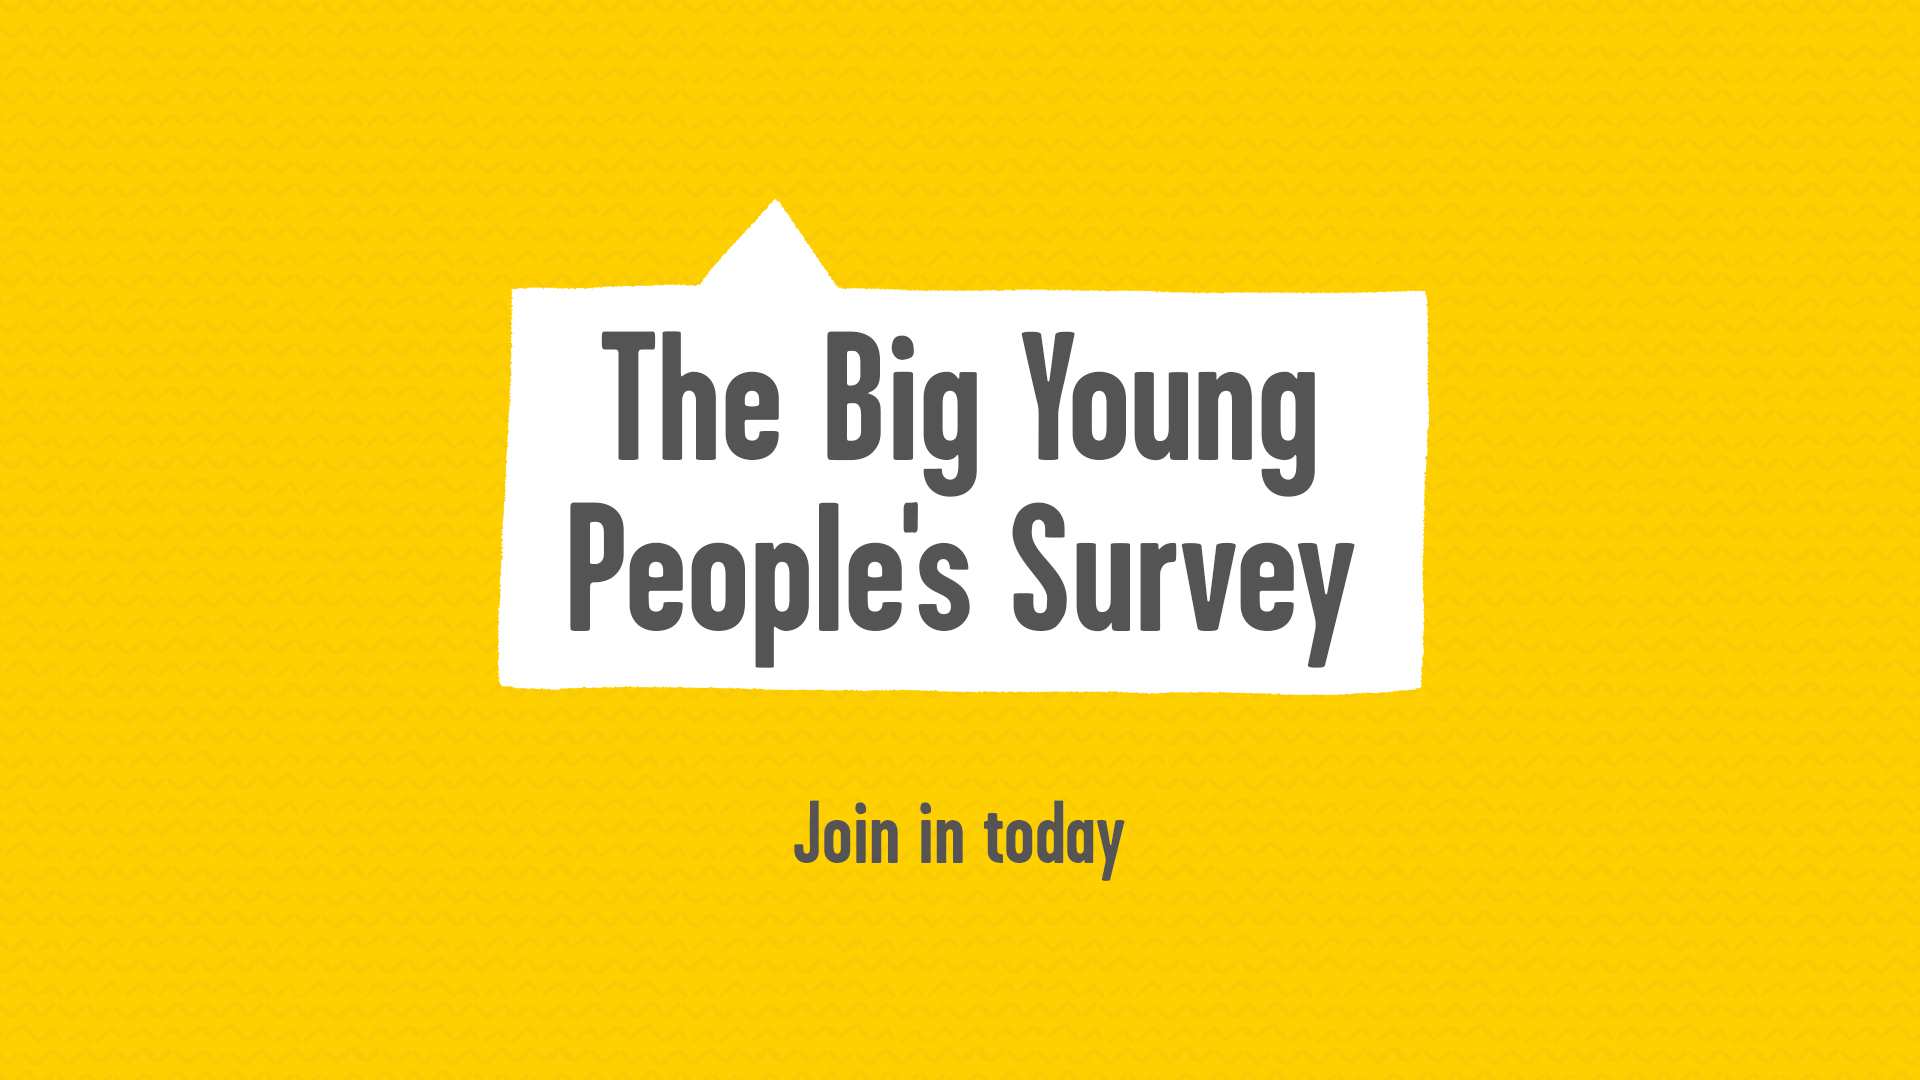 A white speech bubble sits on a yellow textured background with the words: The Big Young People's Survey. Underneath the speech bubble it reads: Have your say on the big issues affecting your life and how you feel. Join in today.